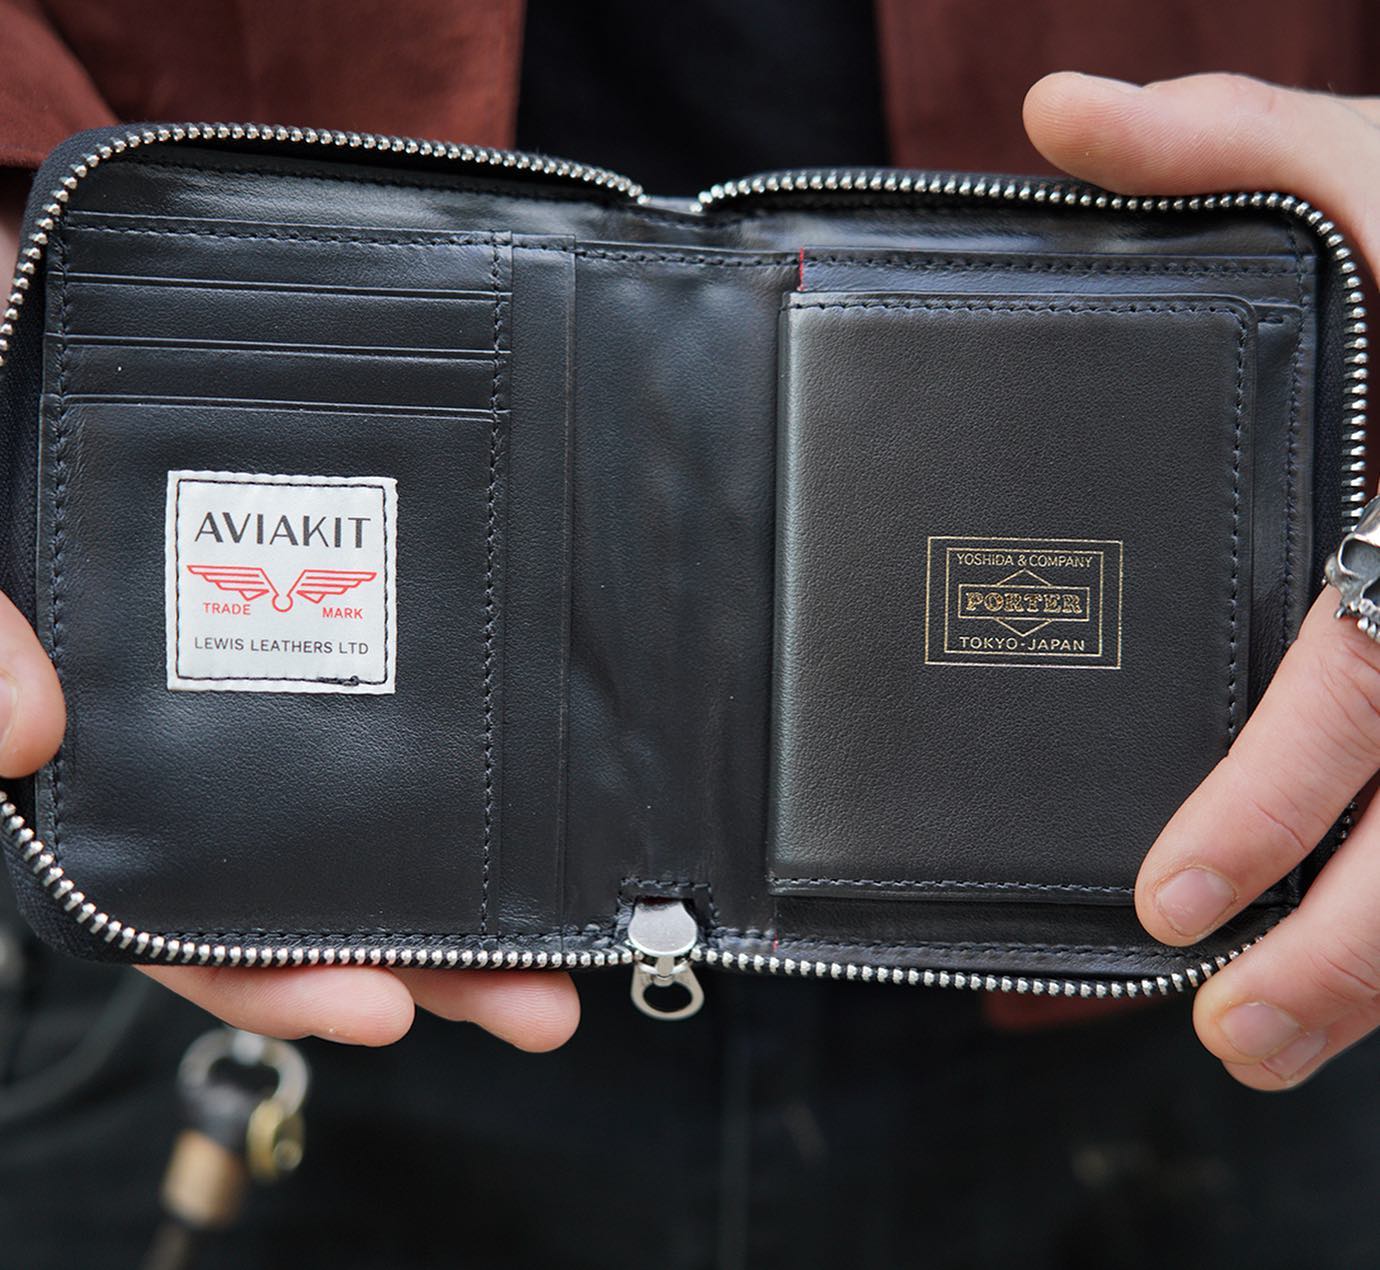 PORTER x Lewis Leathers Collaboration Wallets 2023 - Lewis Leathers